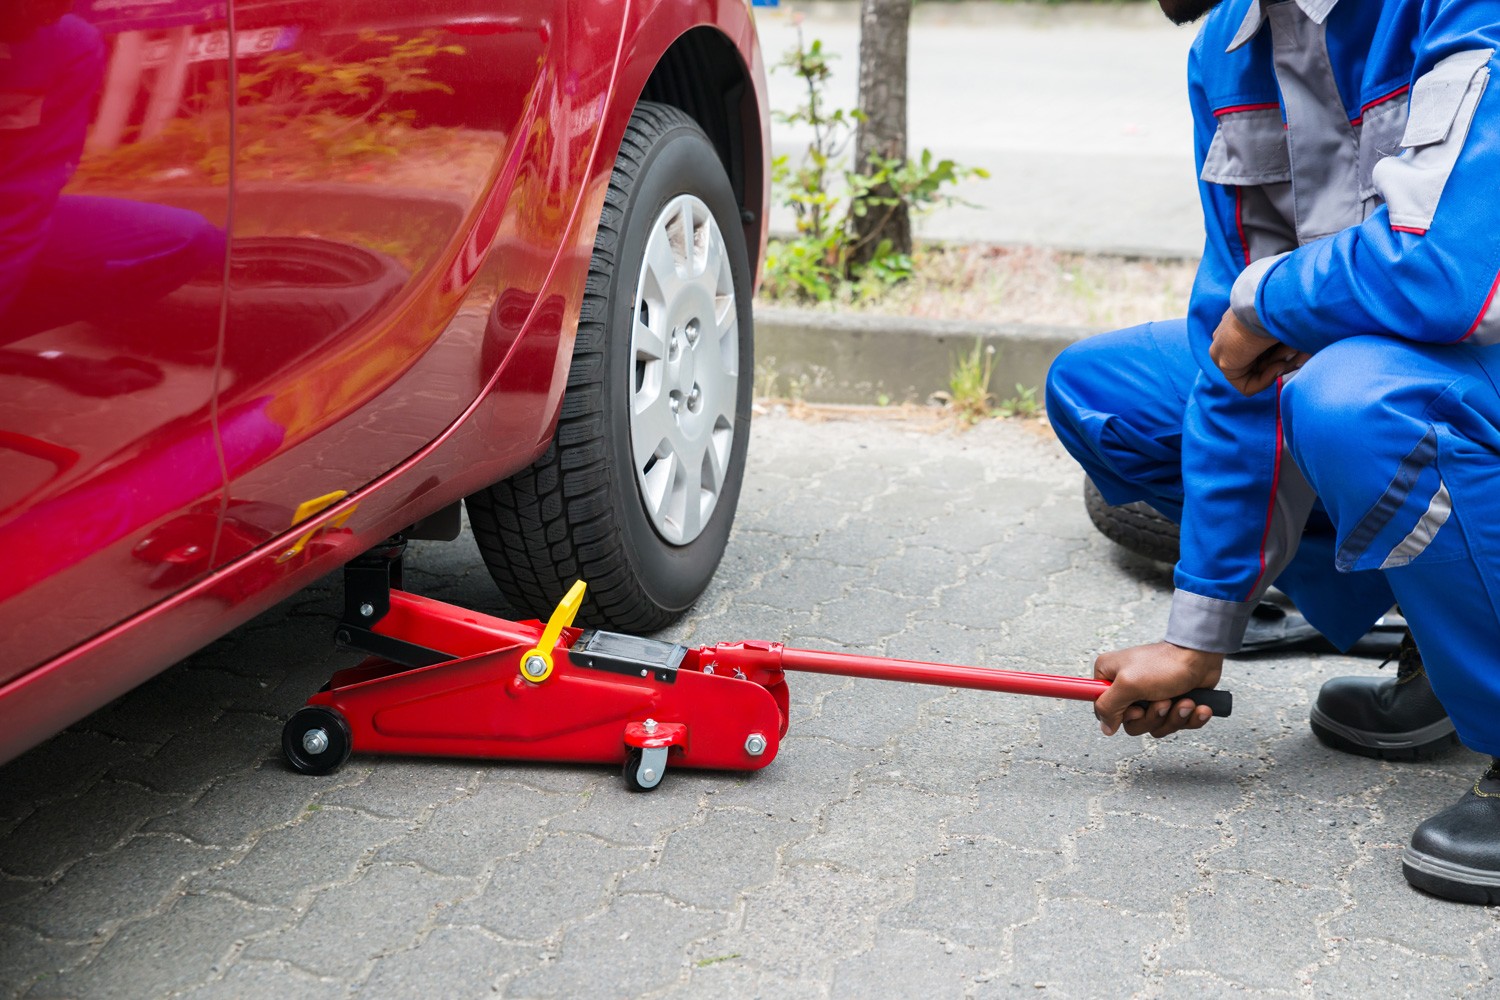 Young Male Mechanic Putting Red Hydraulic Floor Jack Inside The Car